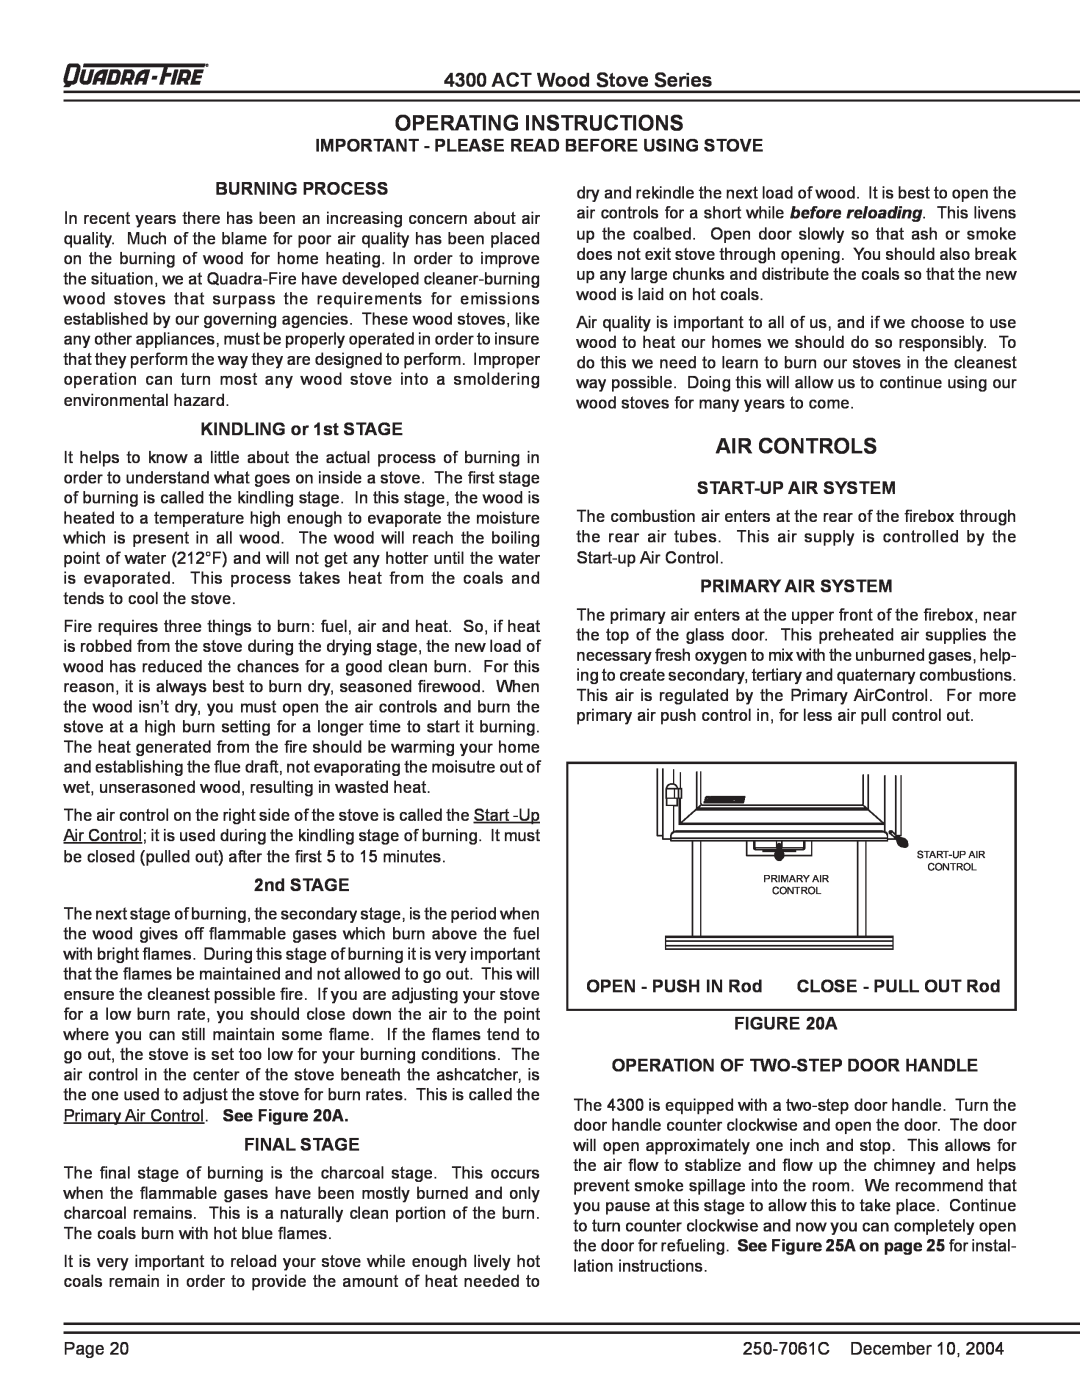 Quadra-Fire 4300 WOOD STOVE SERIES Operating Instructions, Air Controls, ACT Wood Stove Series, Burning Process, 2nd STAGE 